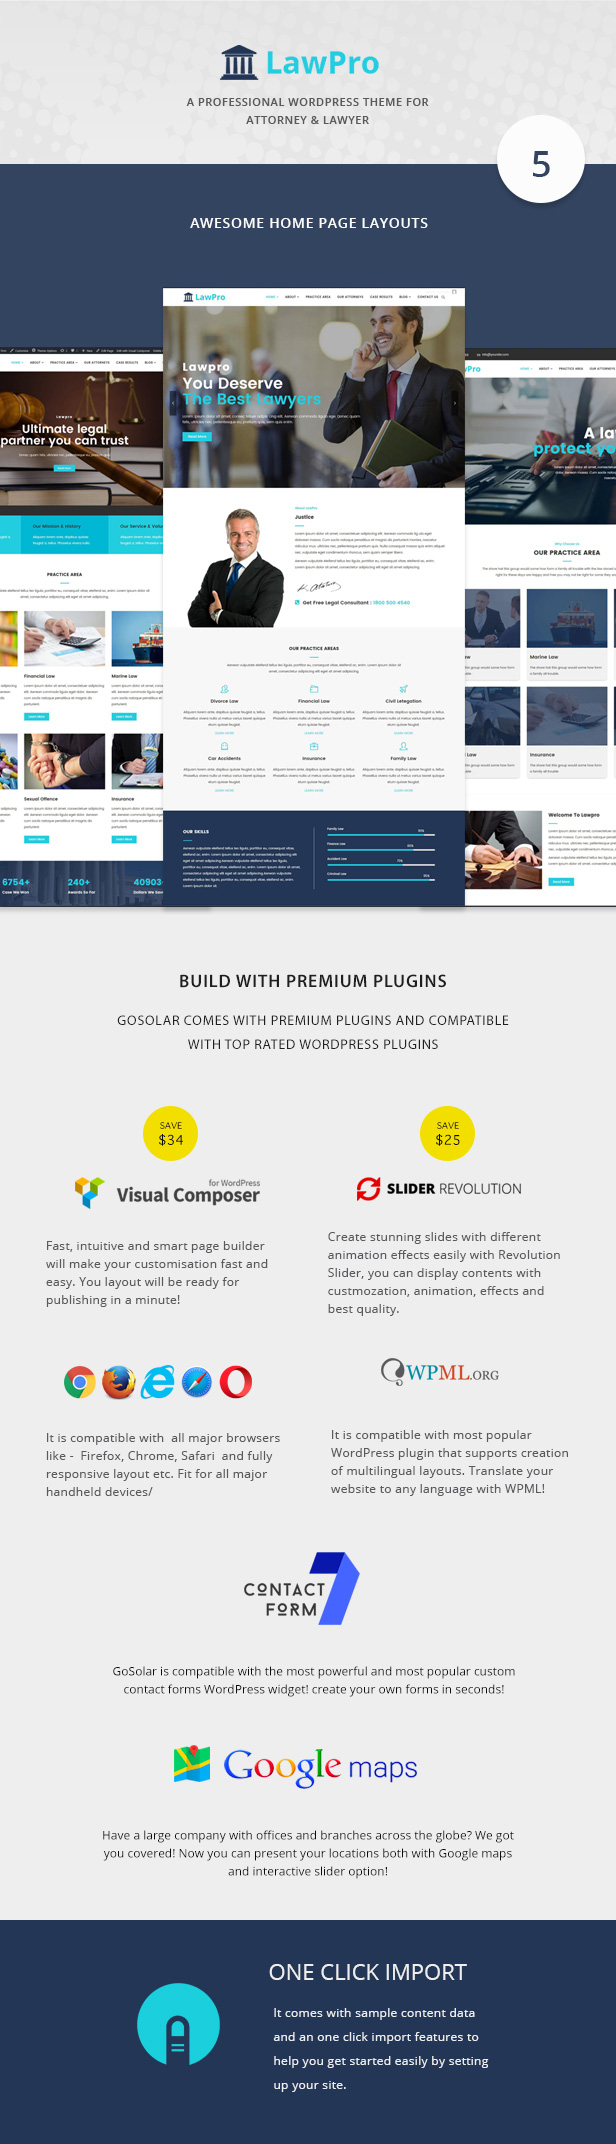 Lawpro - A Professional WordPress Theme for Attorney & Lawyer - 3